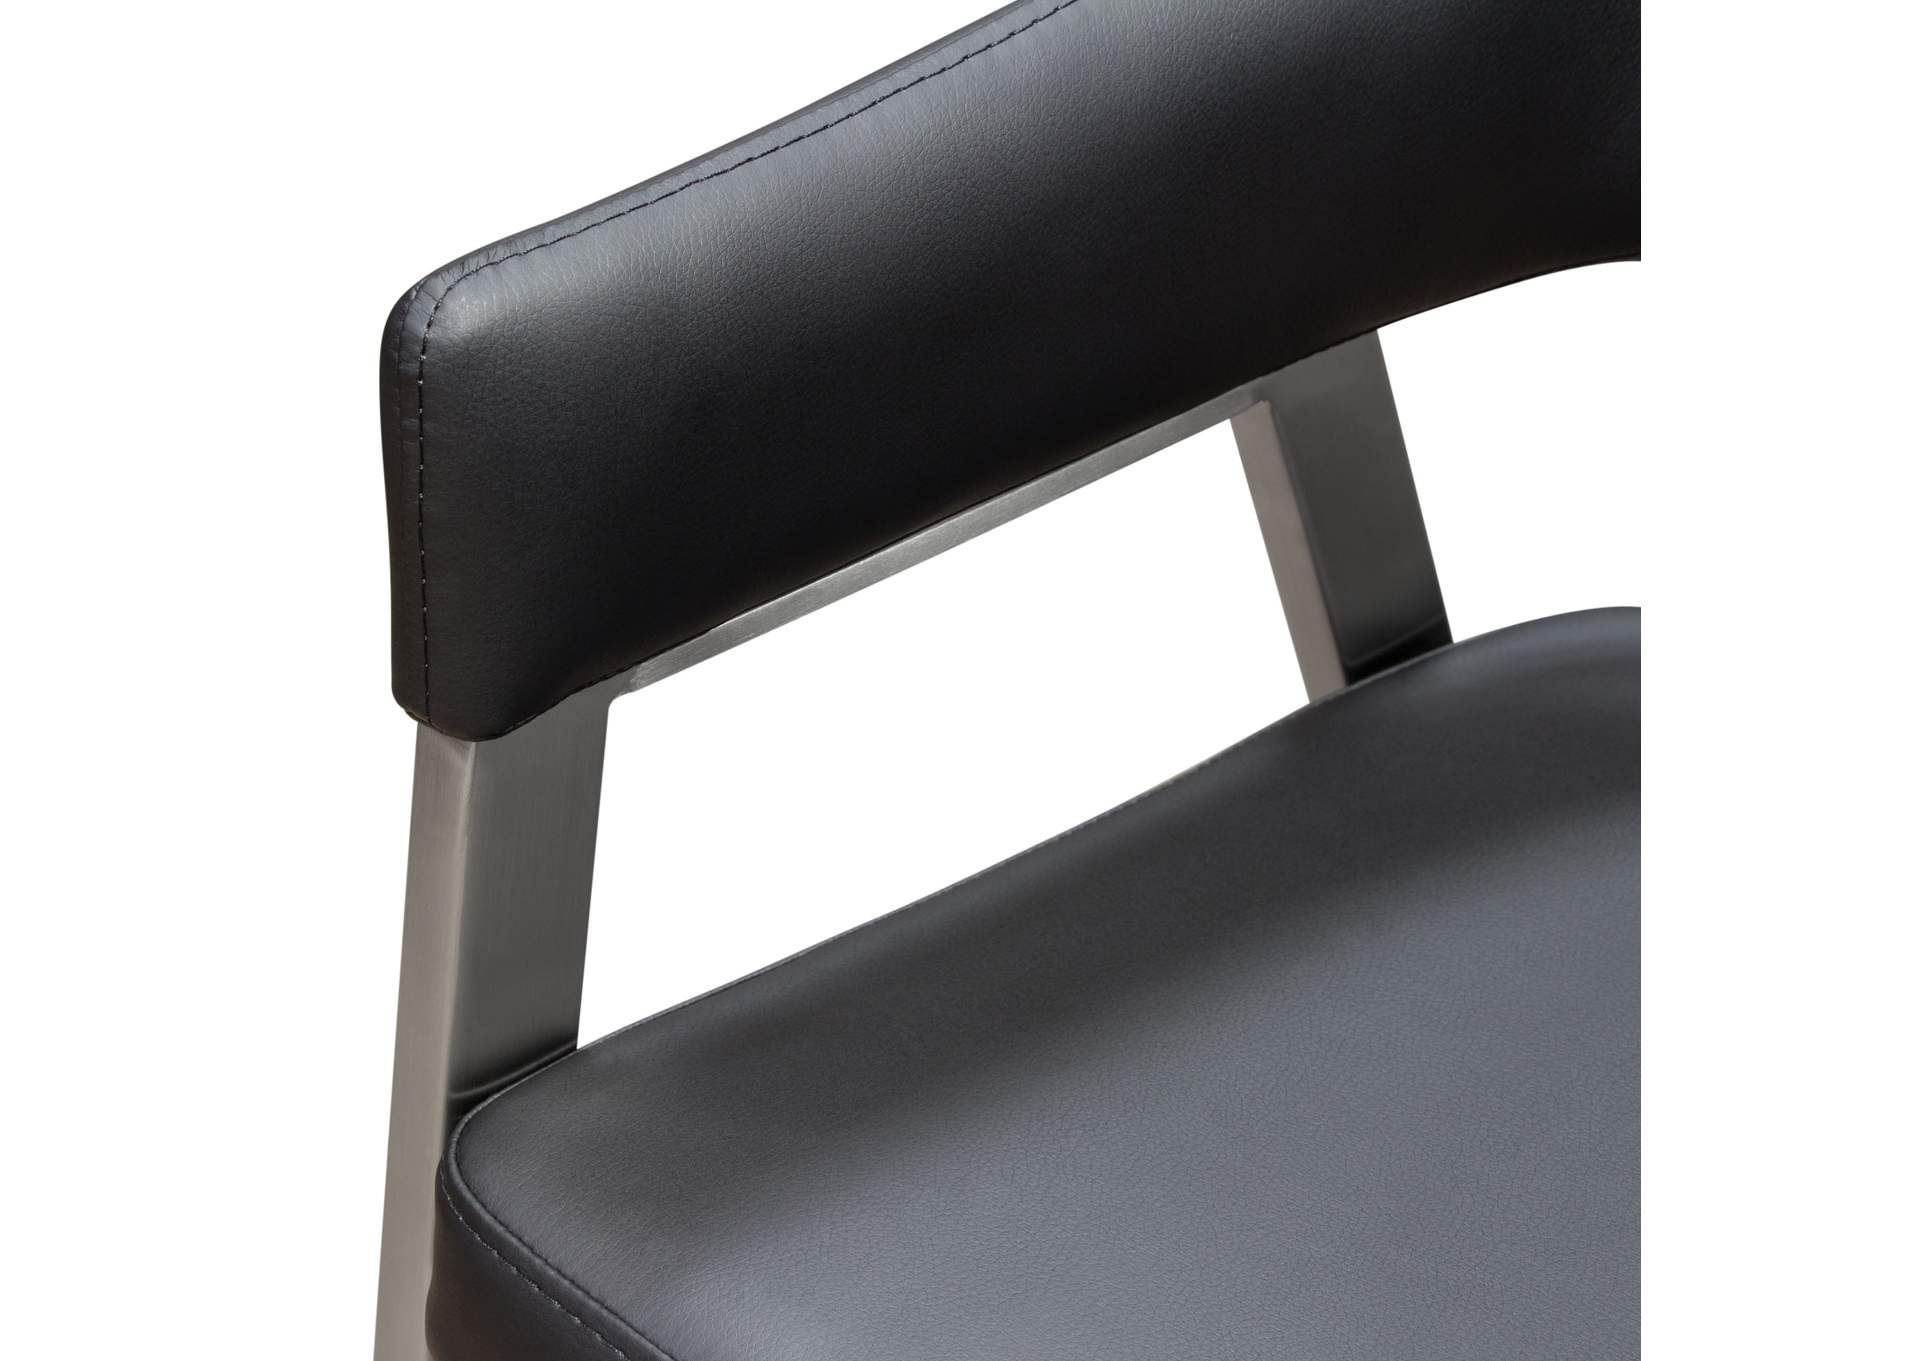 Adele Set of Two Dining/Accent Chairs in Black Leatherette w/ Brushed Stainless Steel Leg by Diamond Sofa,Diamond Sofa